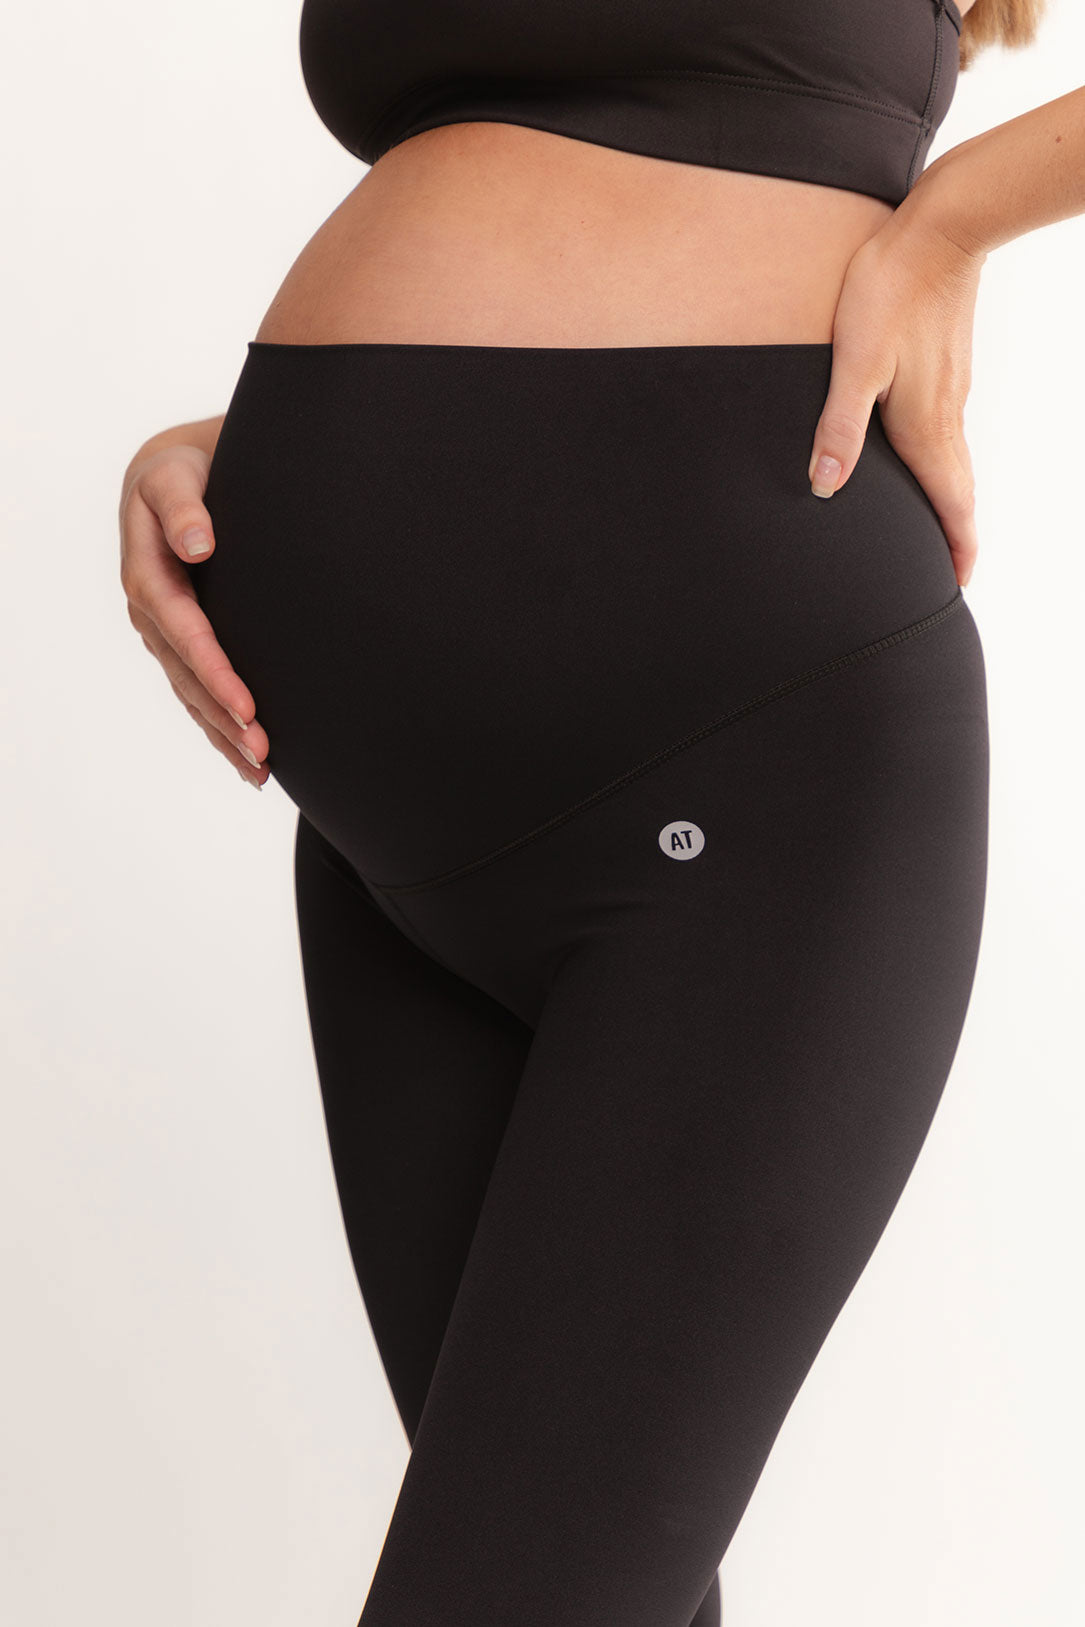 Maternity Support Leggings Patented Back Support 2-Pack – Leading Lady Inc.